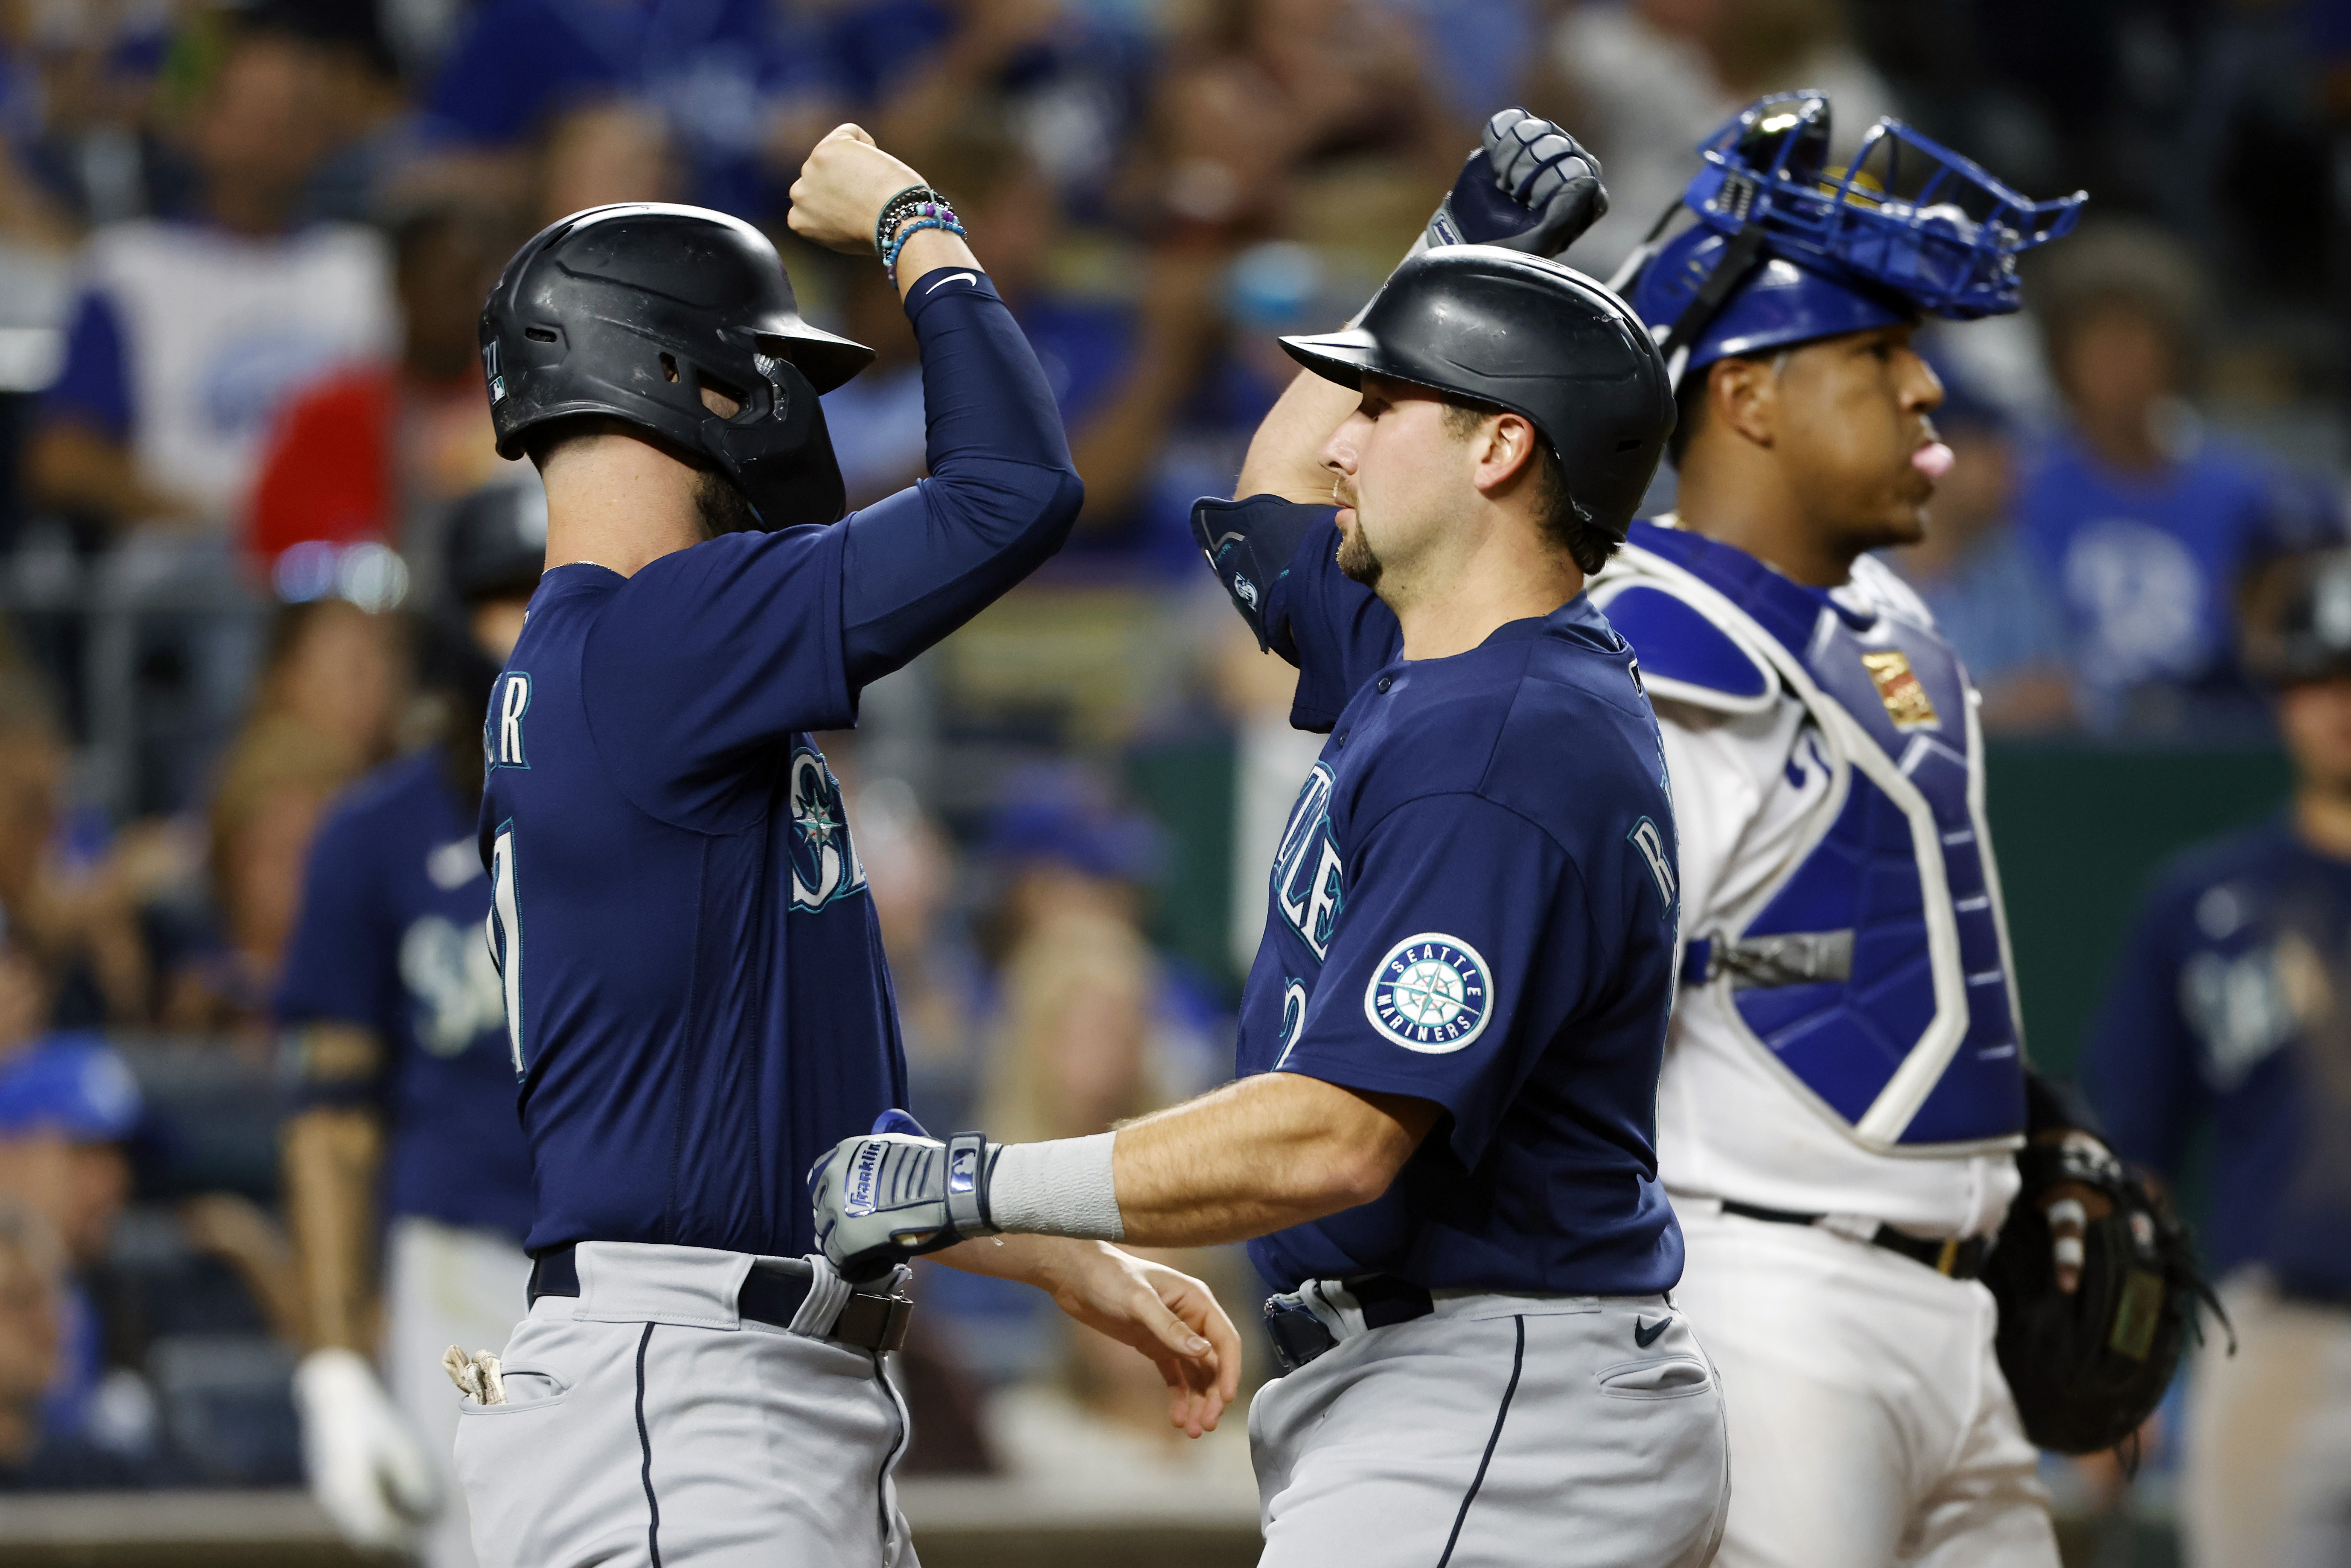 Cal Raleigh's first homer for Mariners at Camden Yards leaves the